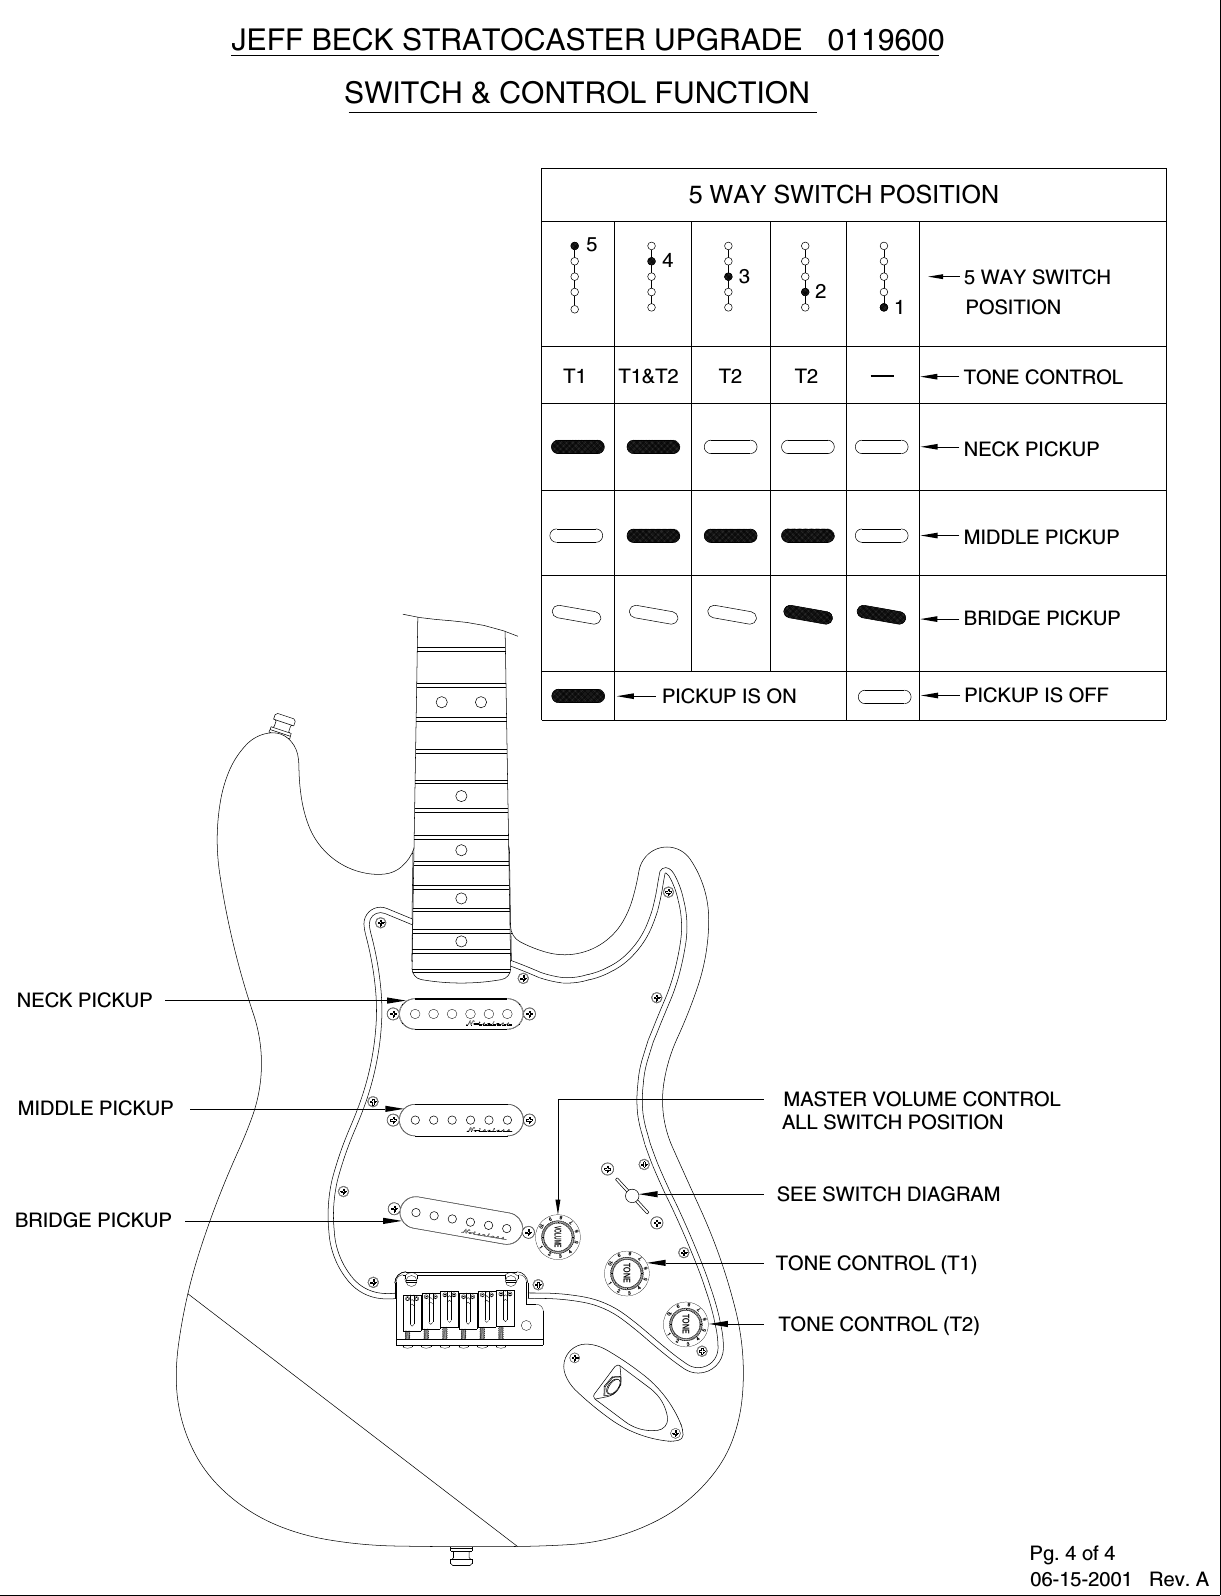 Page 4 of 4 - Fender  011-9600A SISD